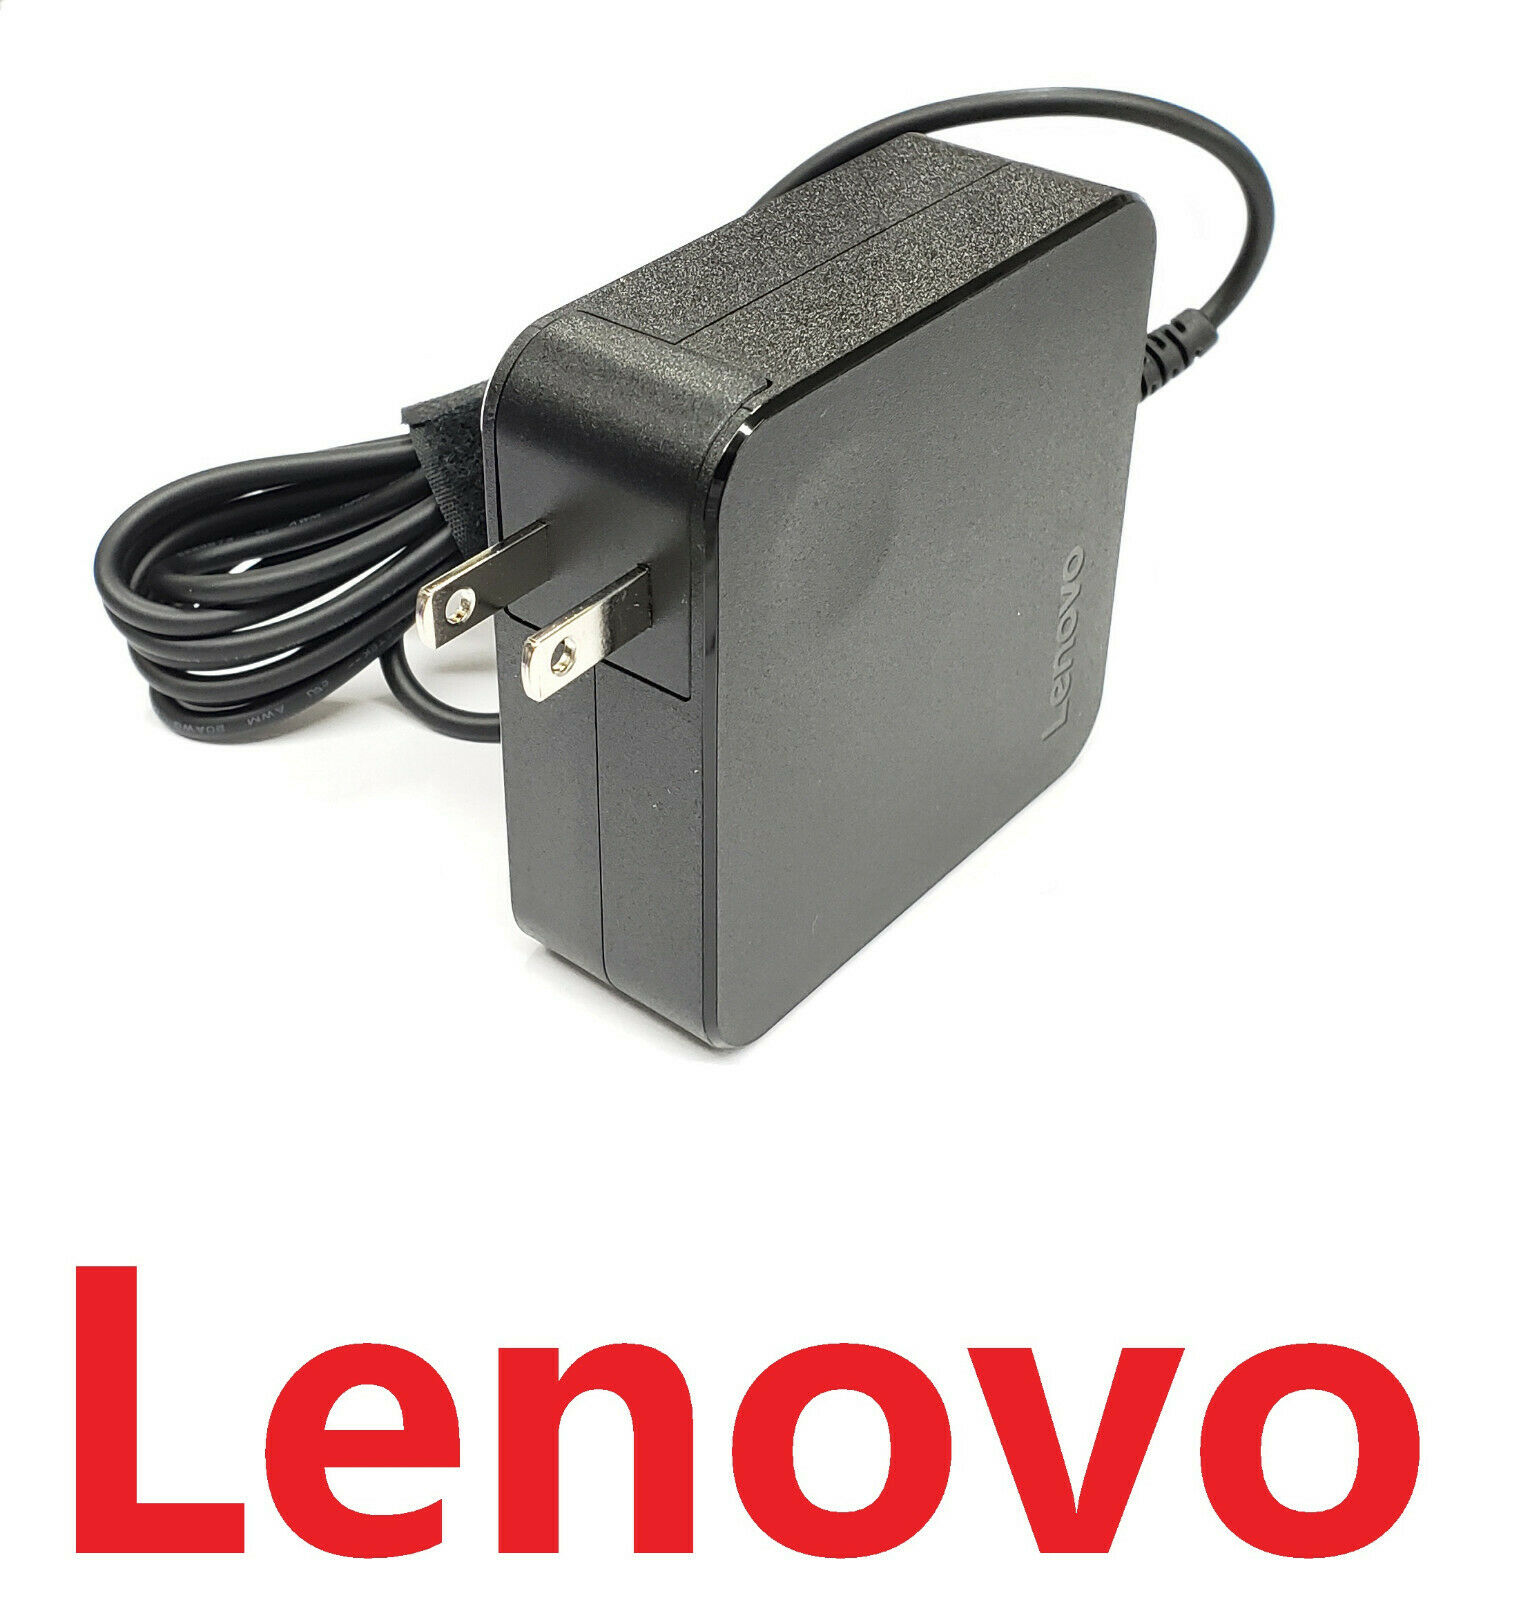 New Genuine Lenovo 65W Charger AC Adapter Ideapad Flex 5 15IIL05 81X3 81X3000VUS Country/Region of Manufacture: China